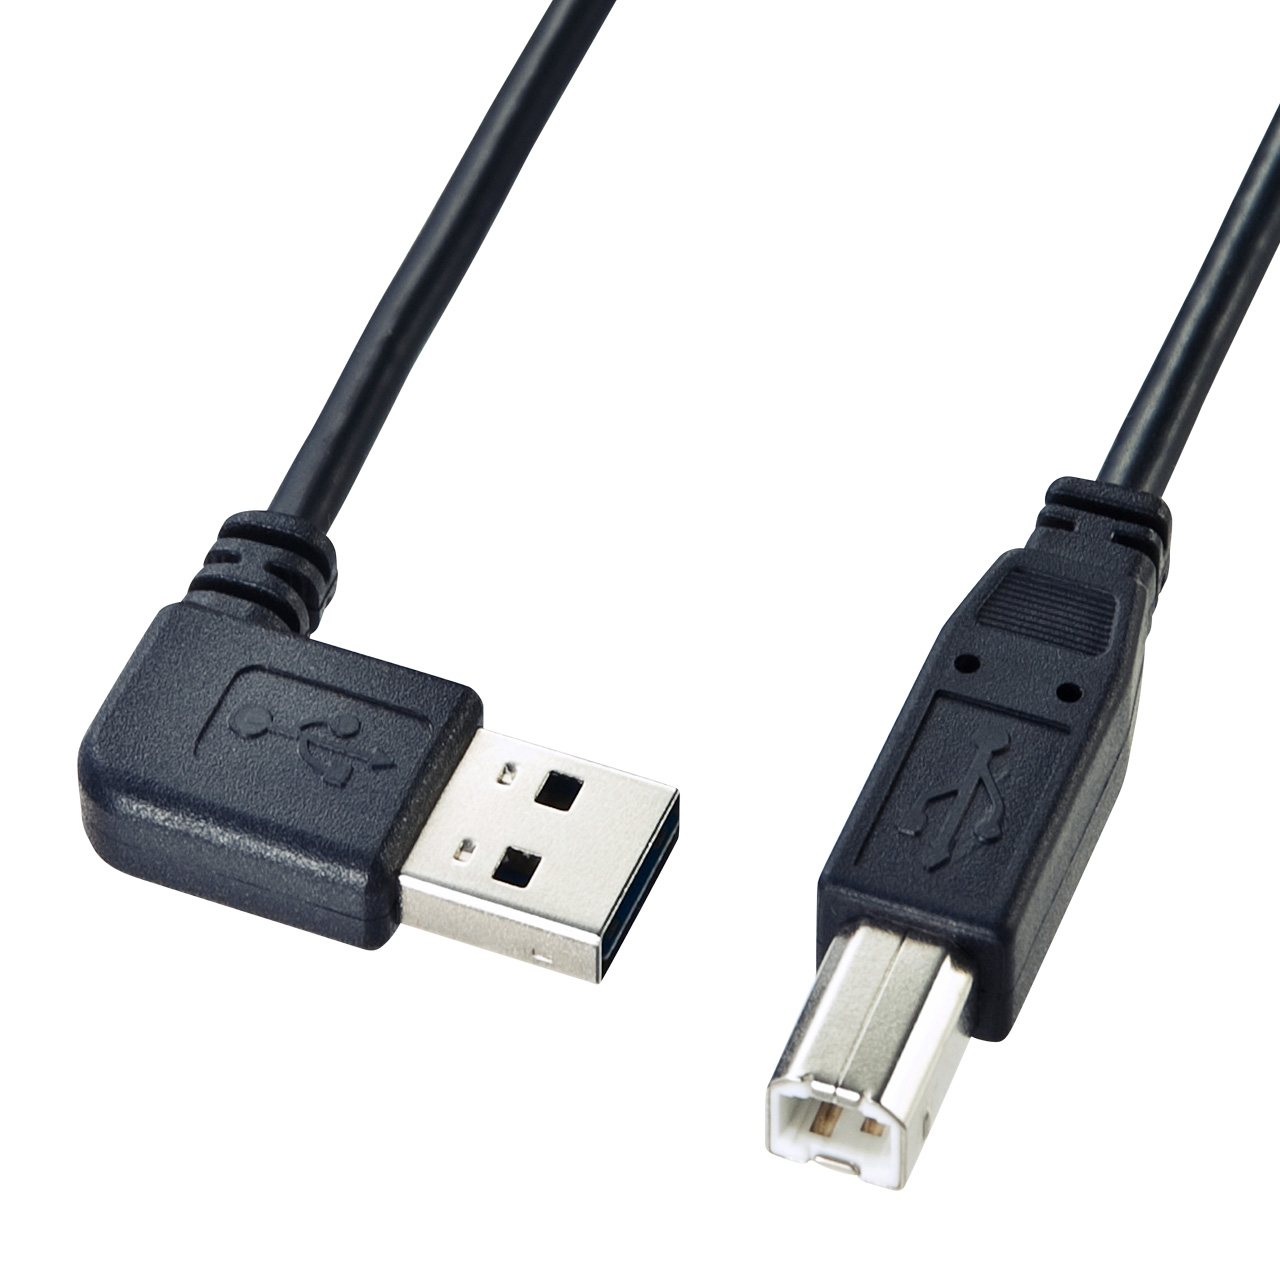 L-shaped USB cable with both sides insertable (A-B standard)